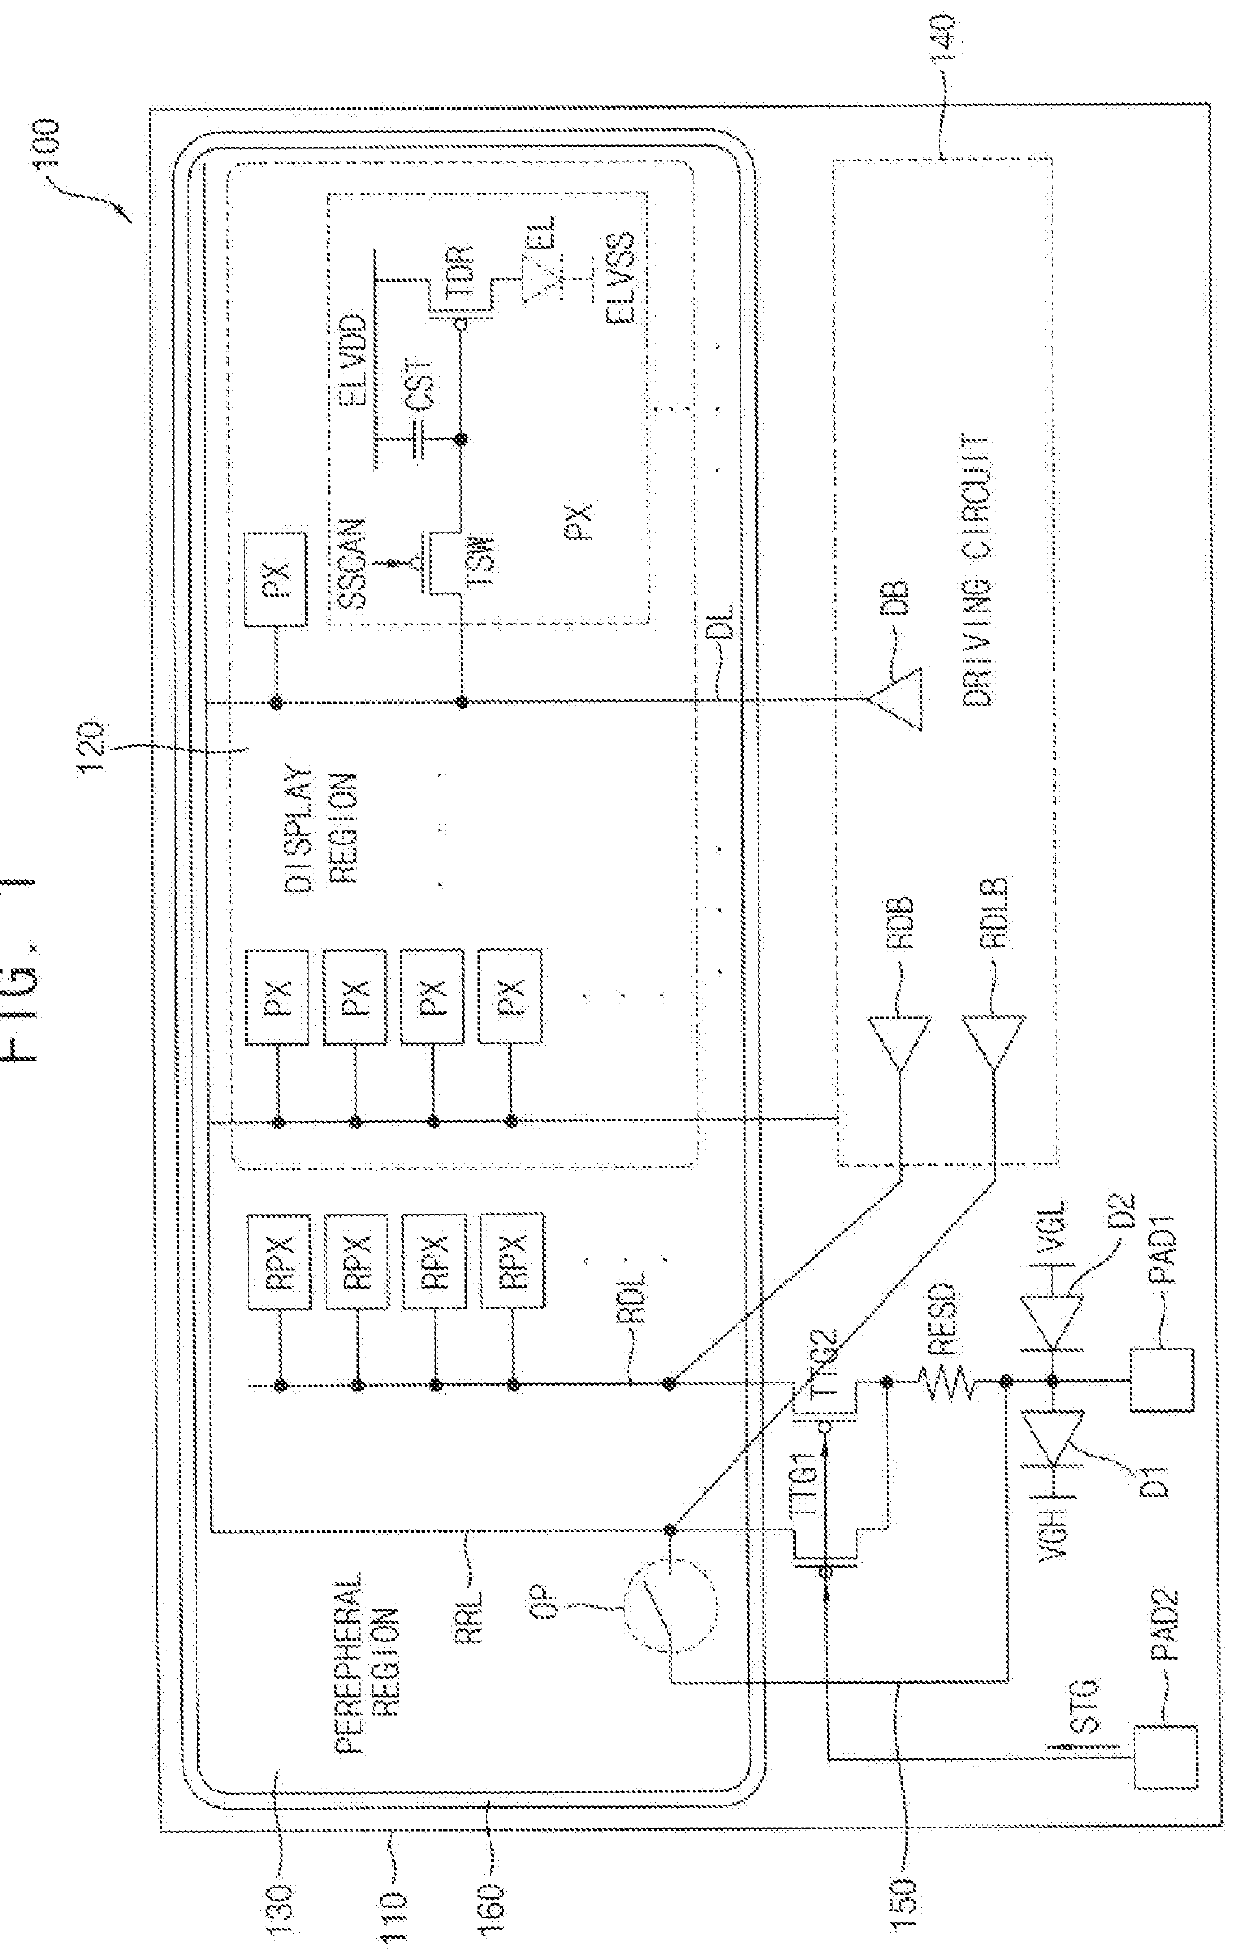 Display device and short circuit test method